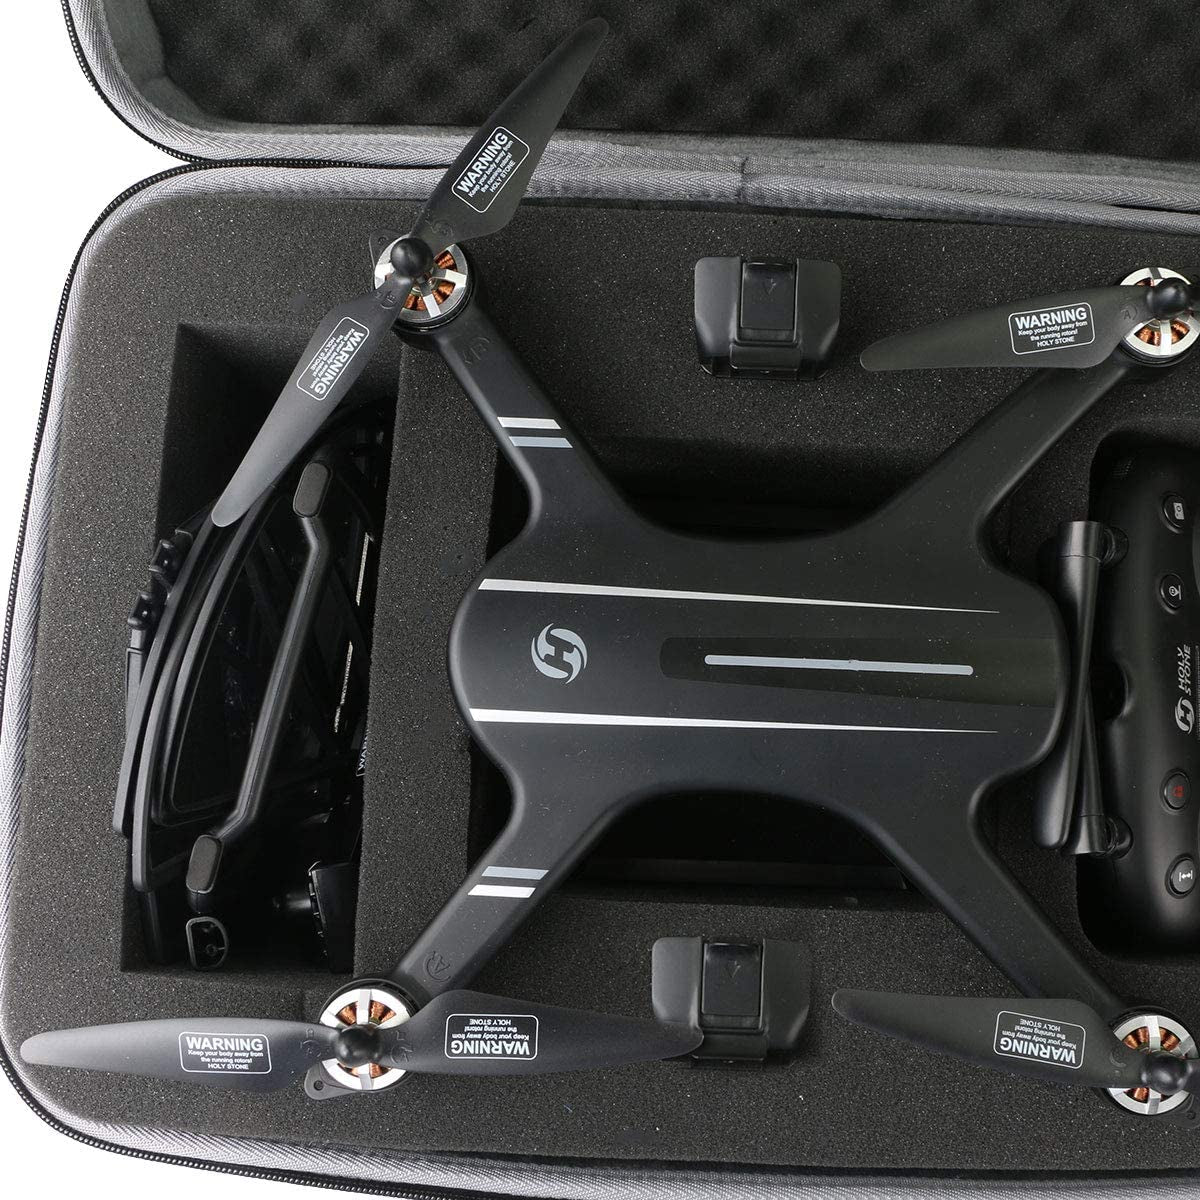 Hard Travel Case for Holy Stone HS700 FPV Drone 1080P HD Camera Live Video GPS Return Home RC Quadcopter (Black Case -Size 2)